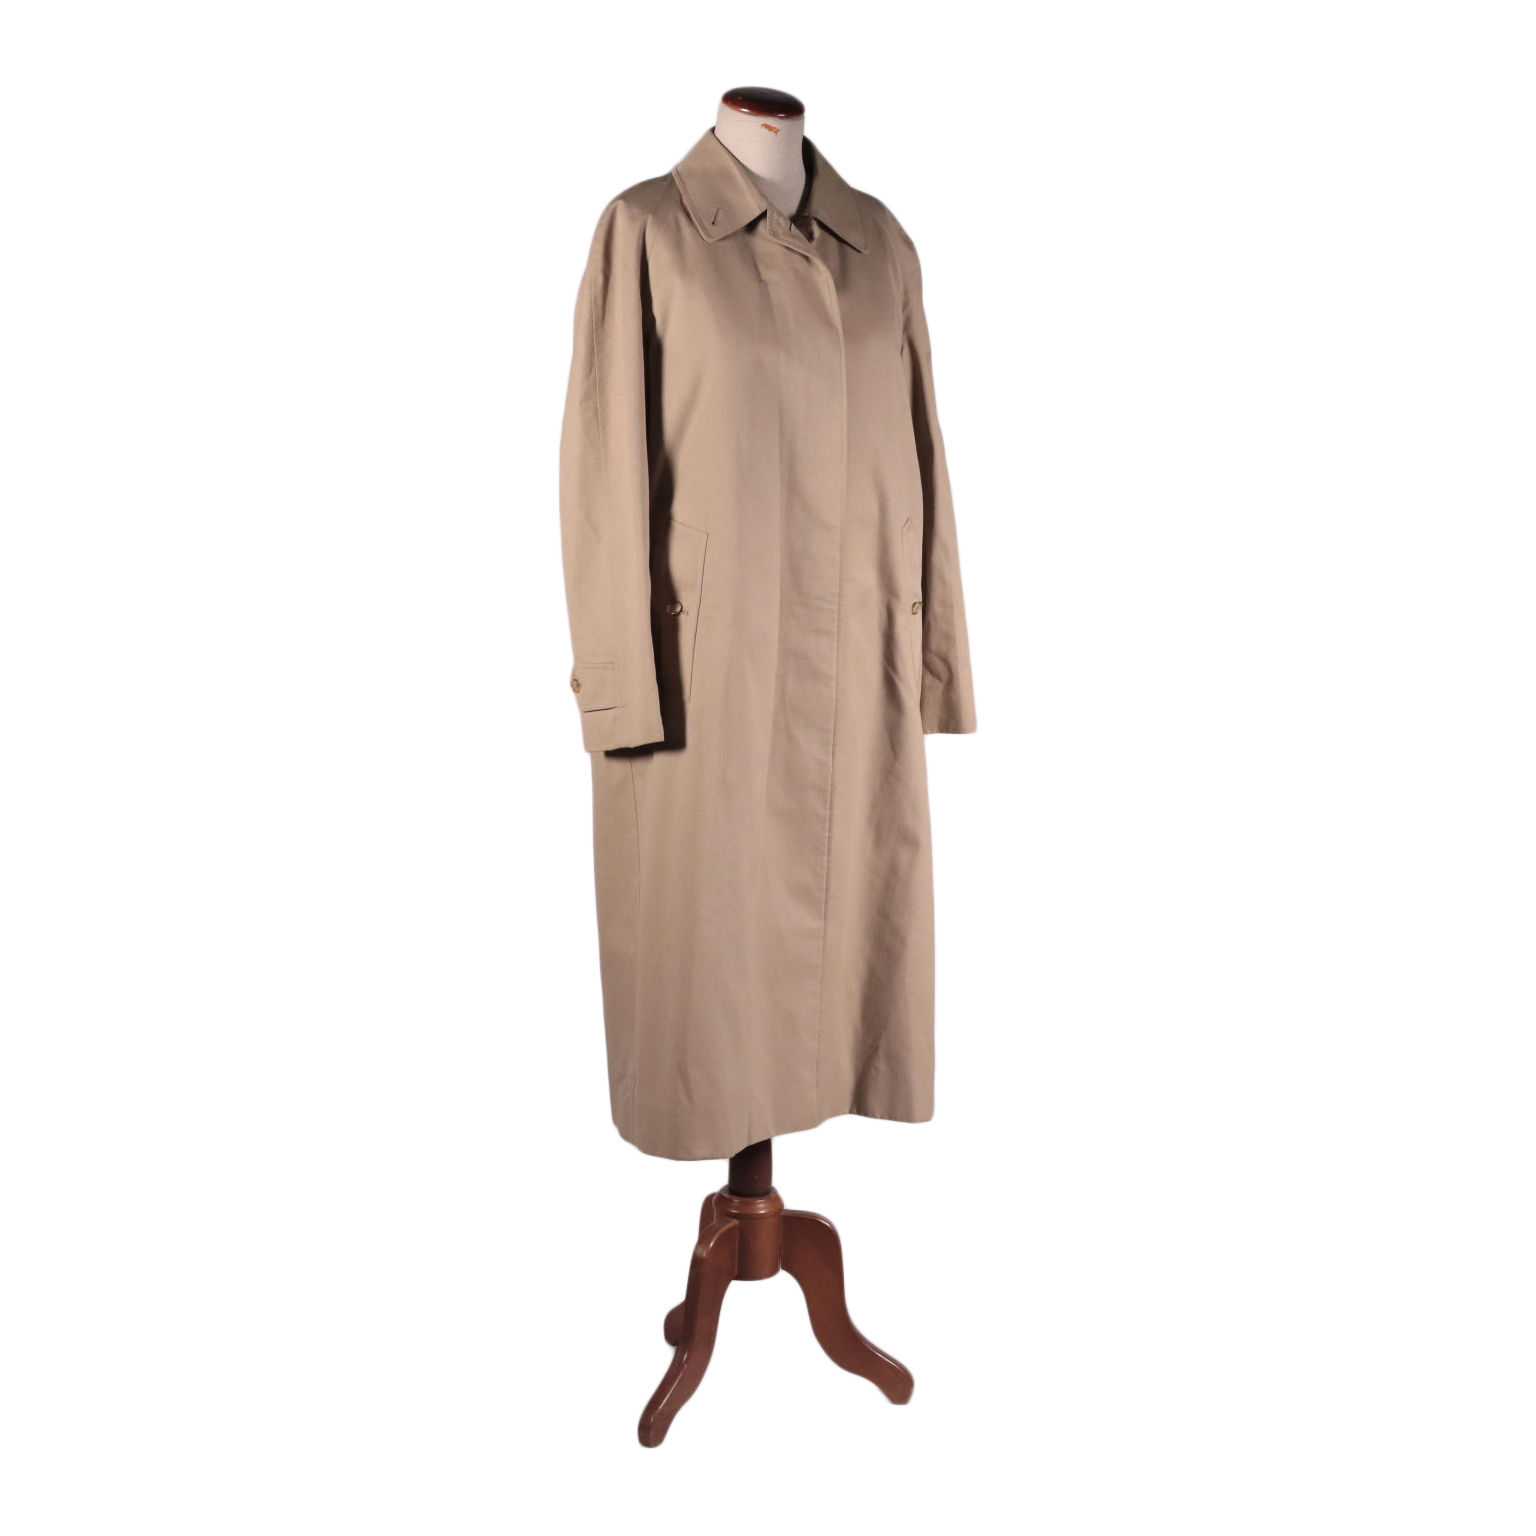 Burberry Vintage Trench Coat, Size M, Apparel, Vintage, dimanoinmano. It